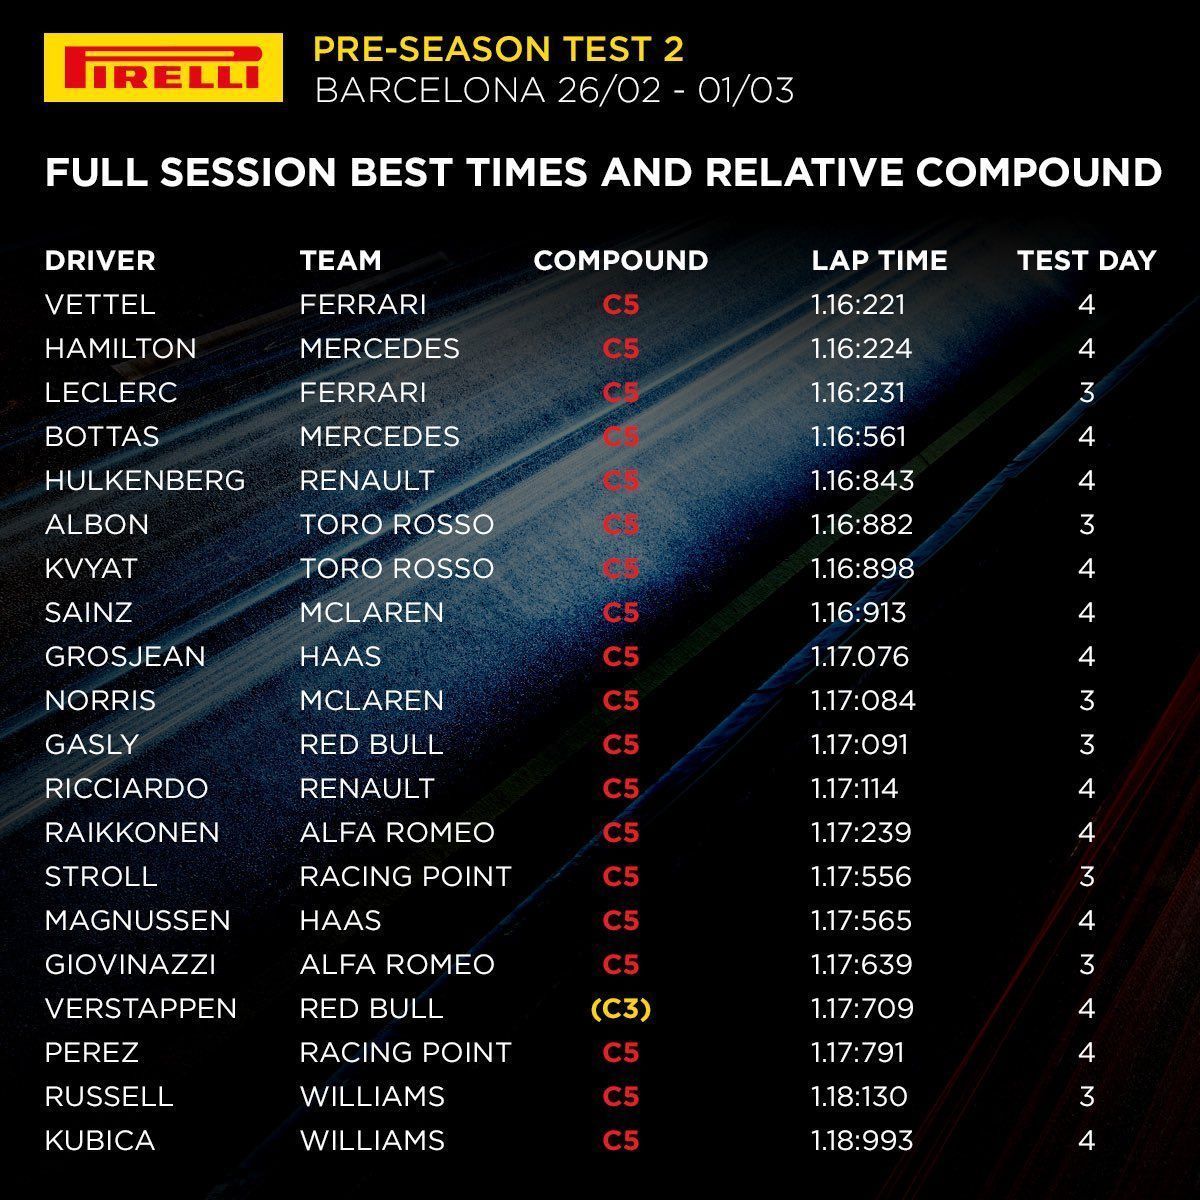 Barcelona F1 2019 Test Look back at best times, lap count and more